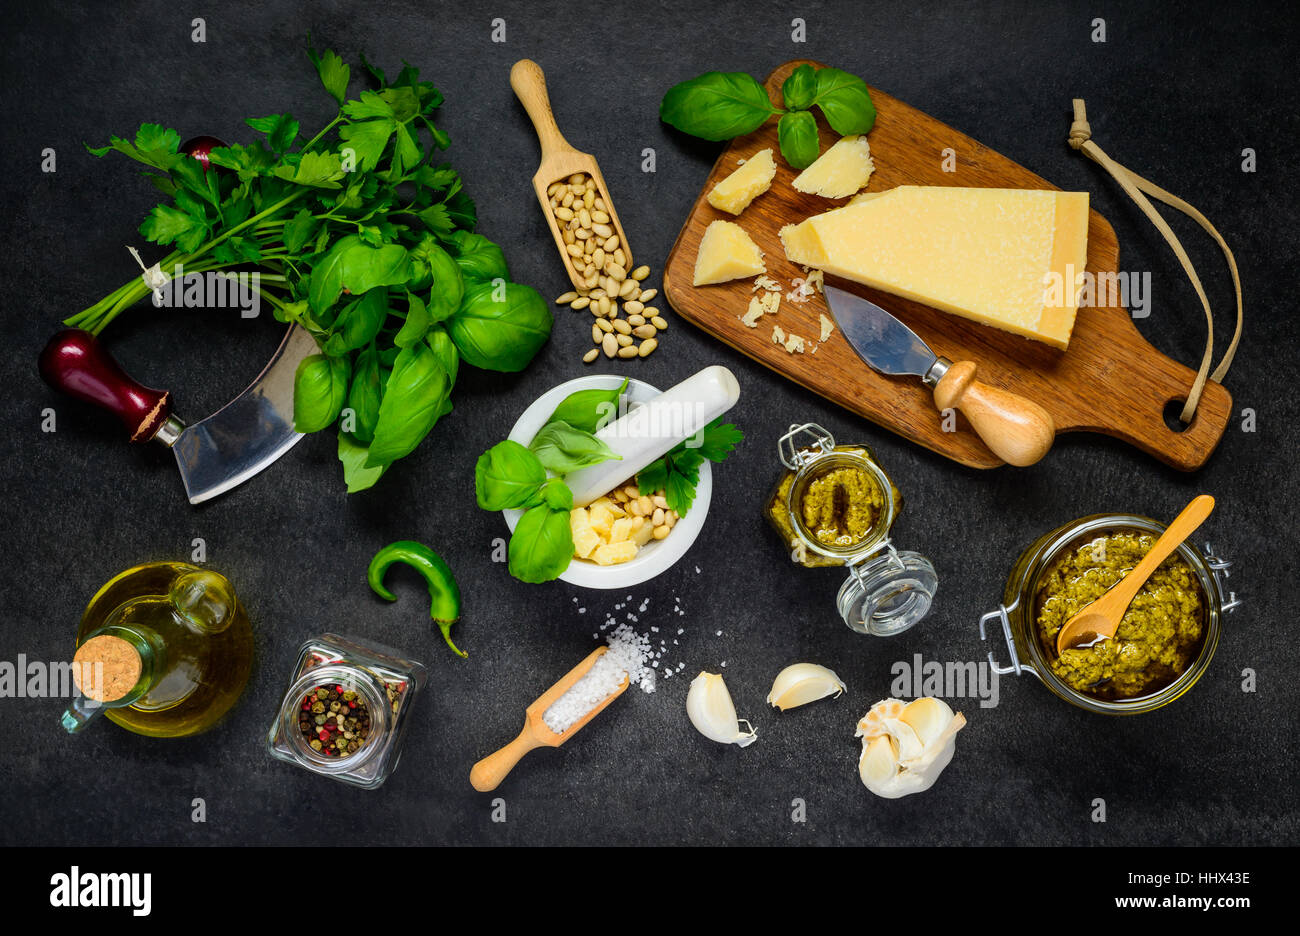 Top View of Parmesan Cheese with Pine Nuts, Pesto and other Cooking Ingredients Stock Photo